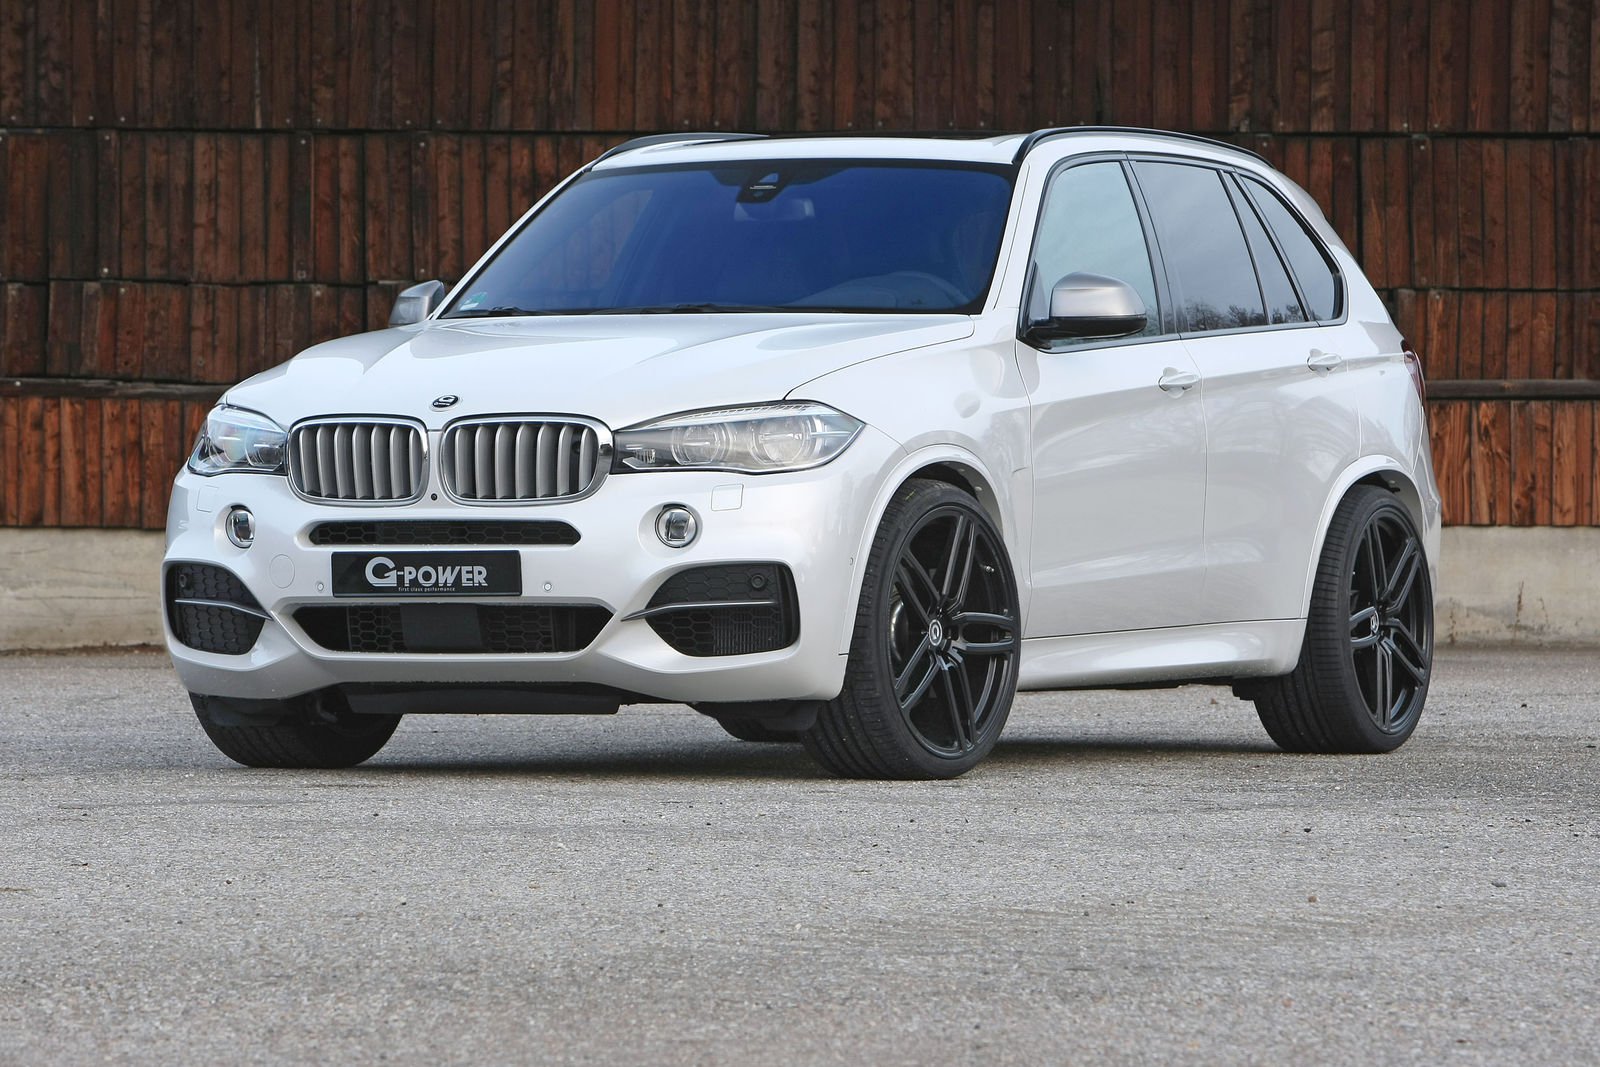 G-Power gives 455 horsepower to the BMW X5 M50d